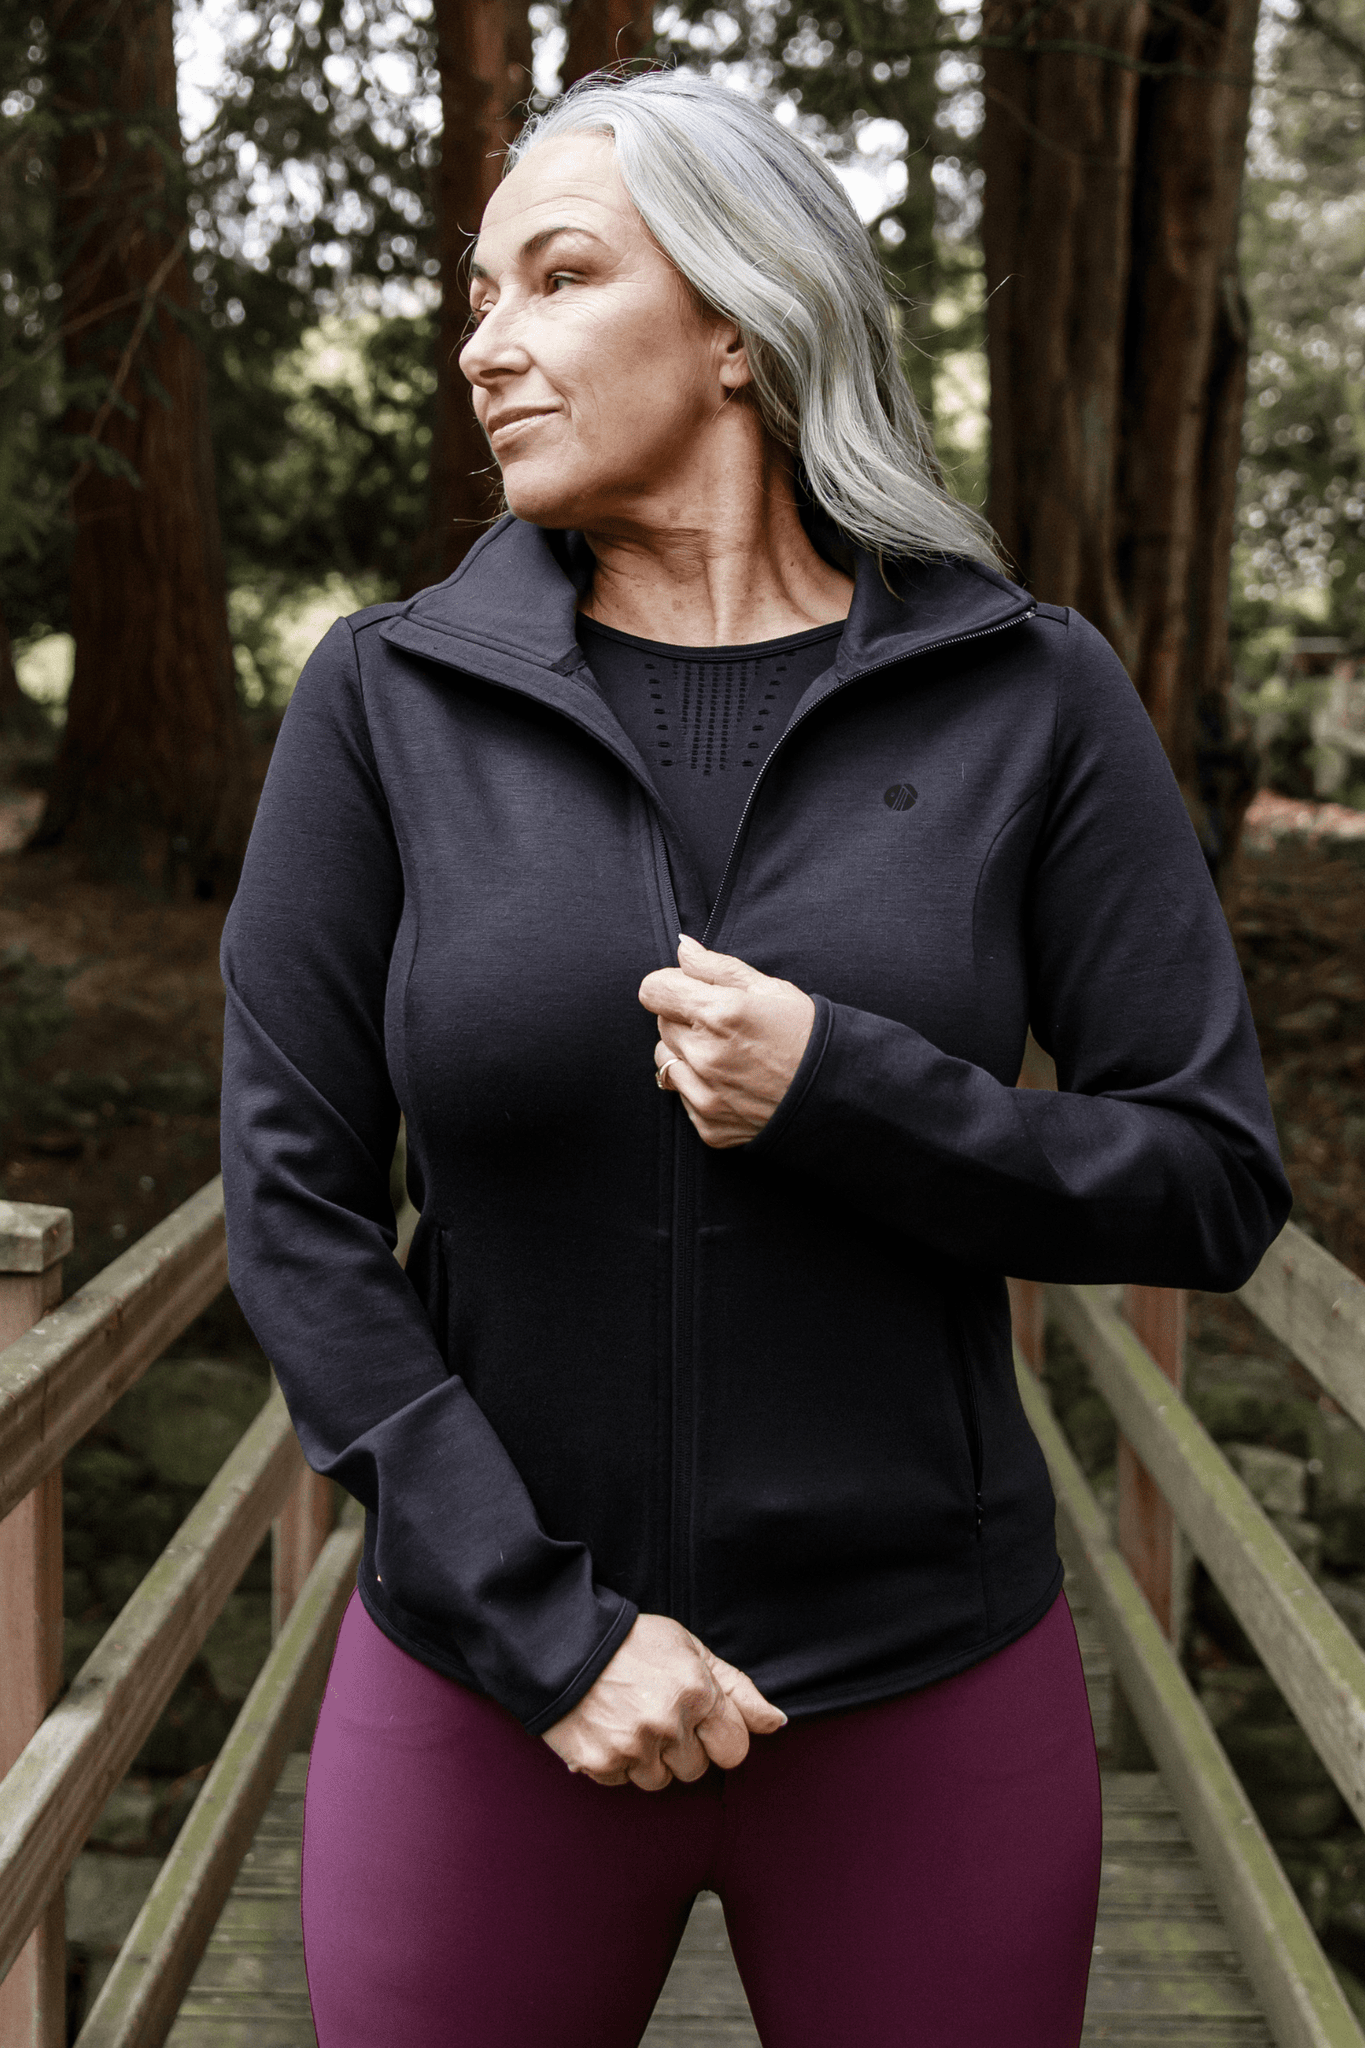 ACAI Outdoorwear - Style, Performance, Fit